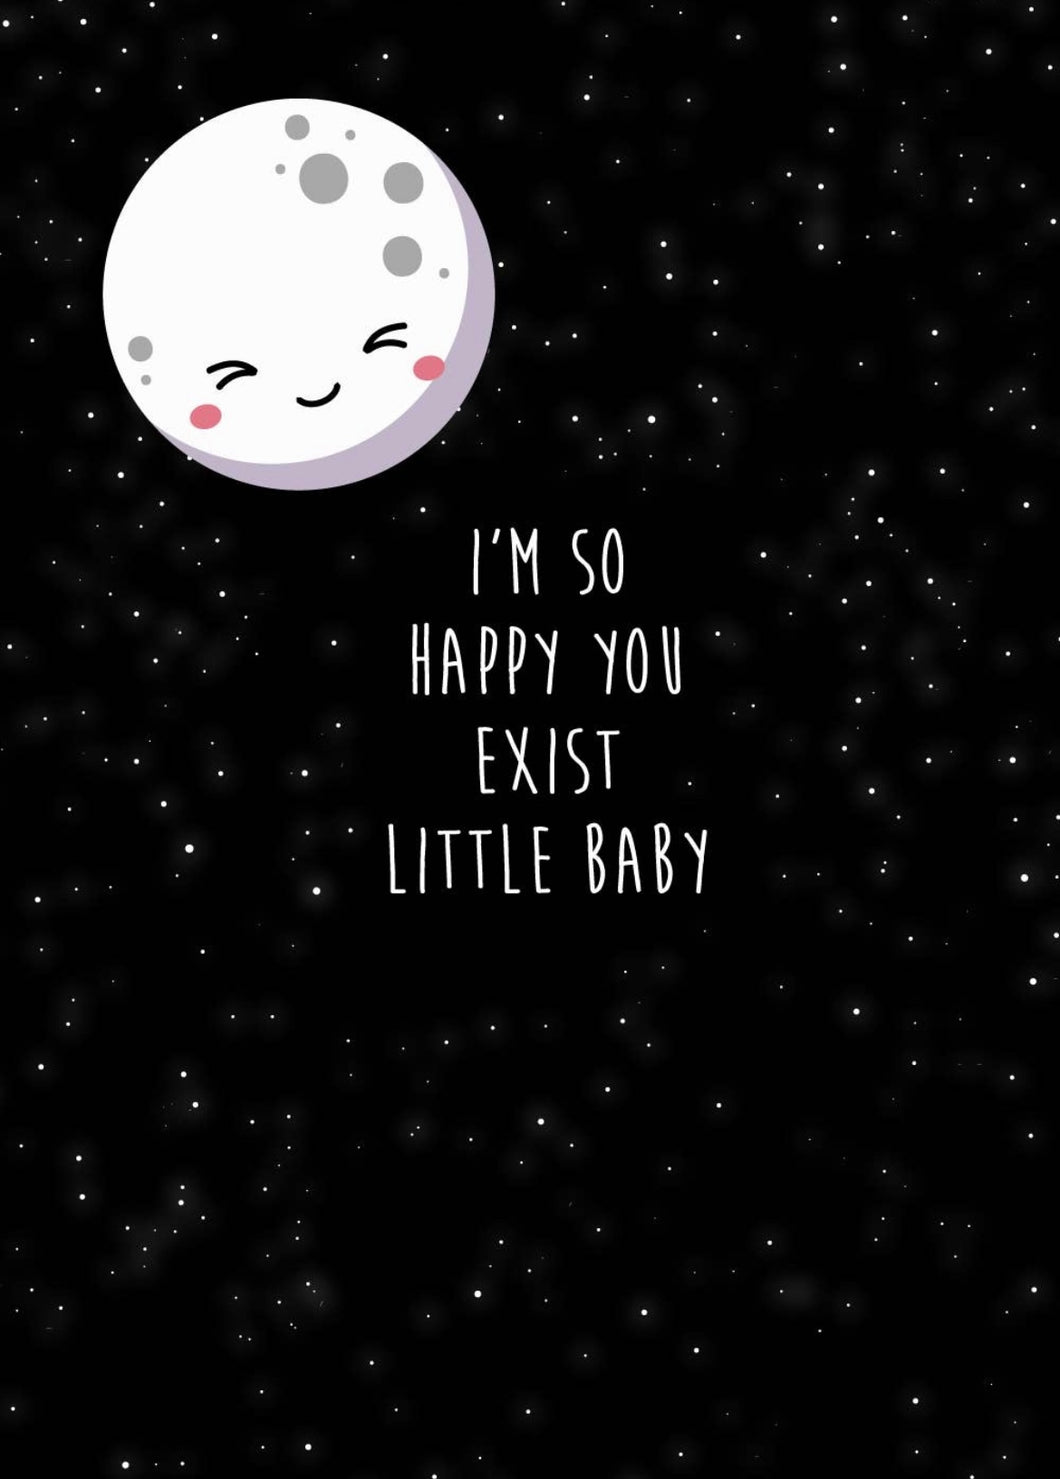 I'm so happy you exist little baby postcard